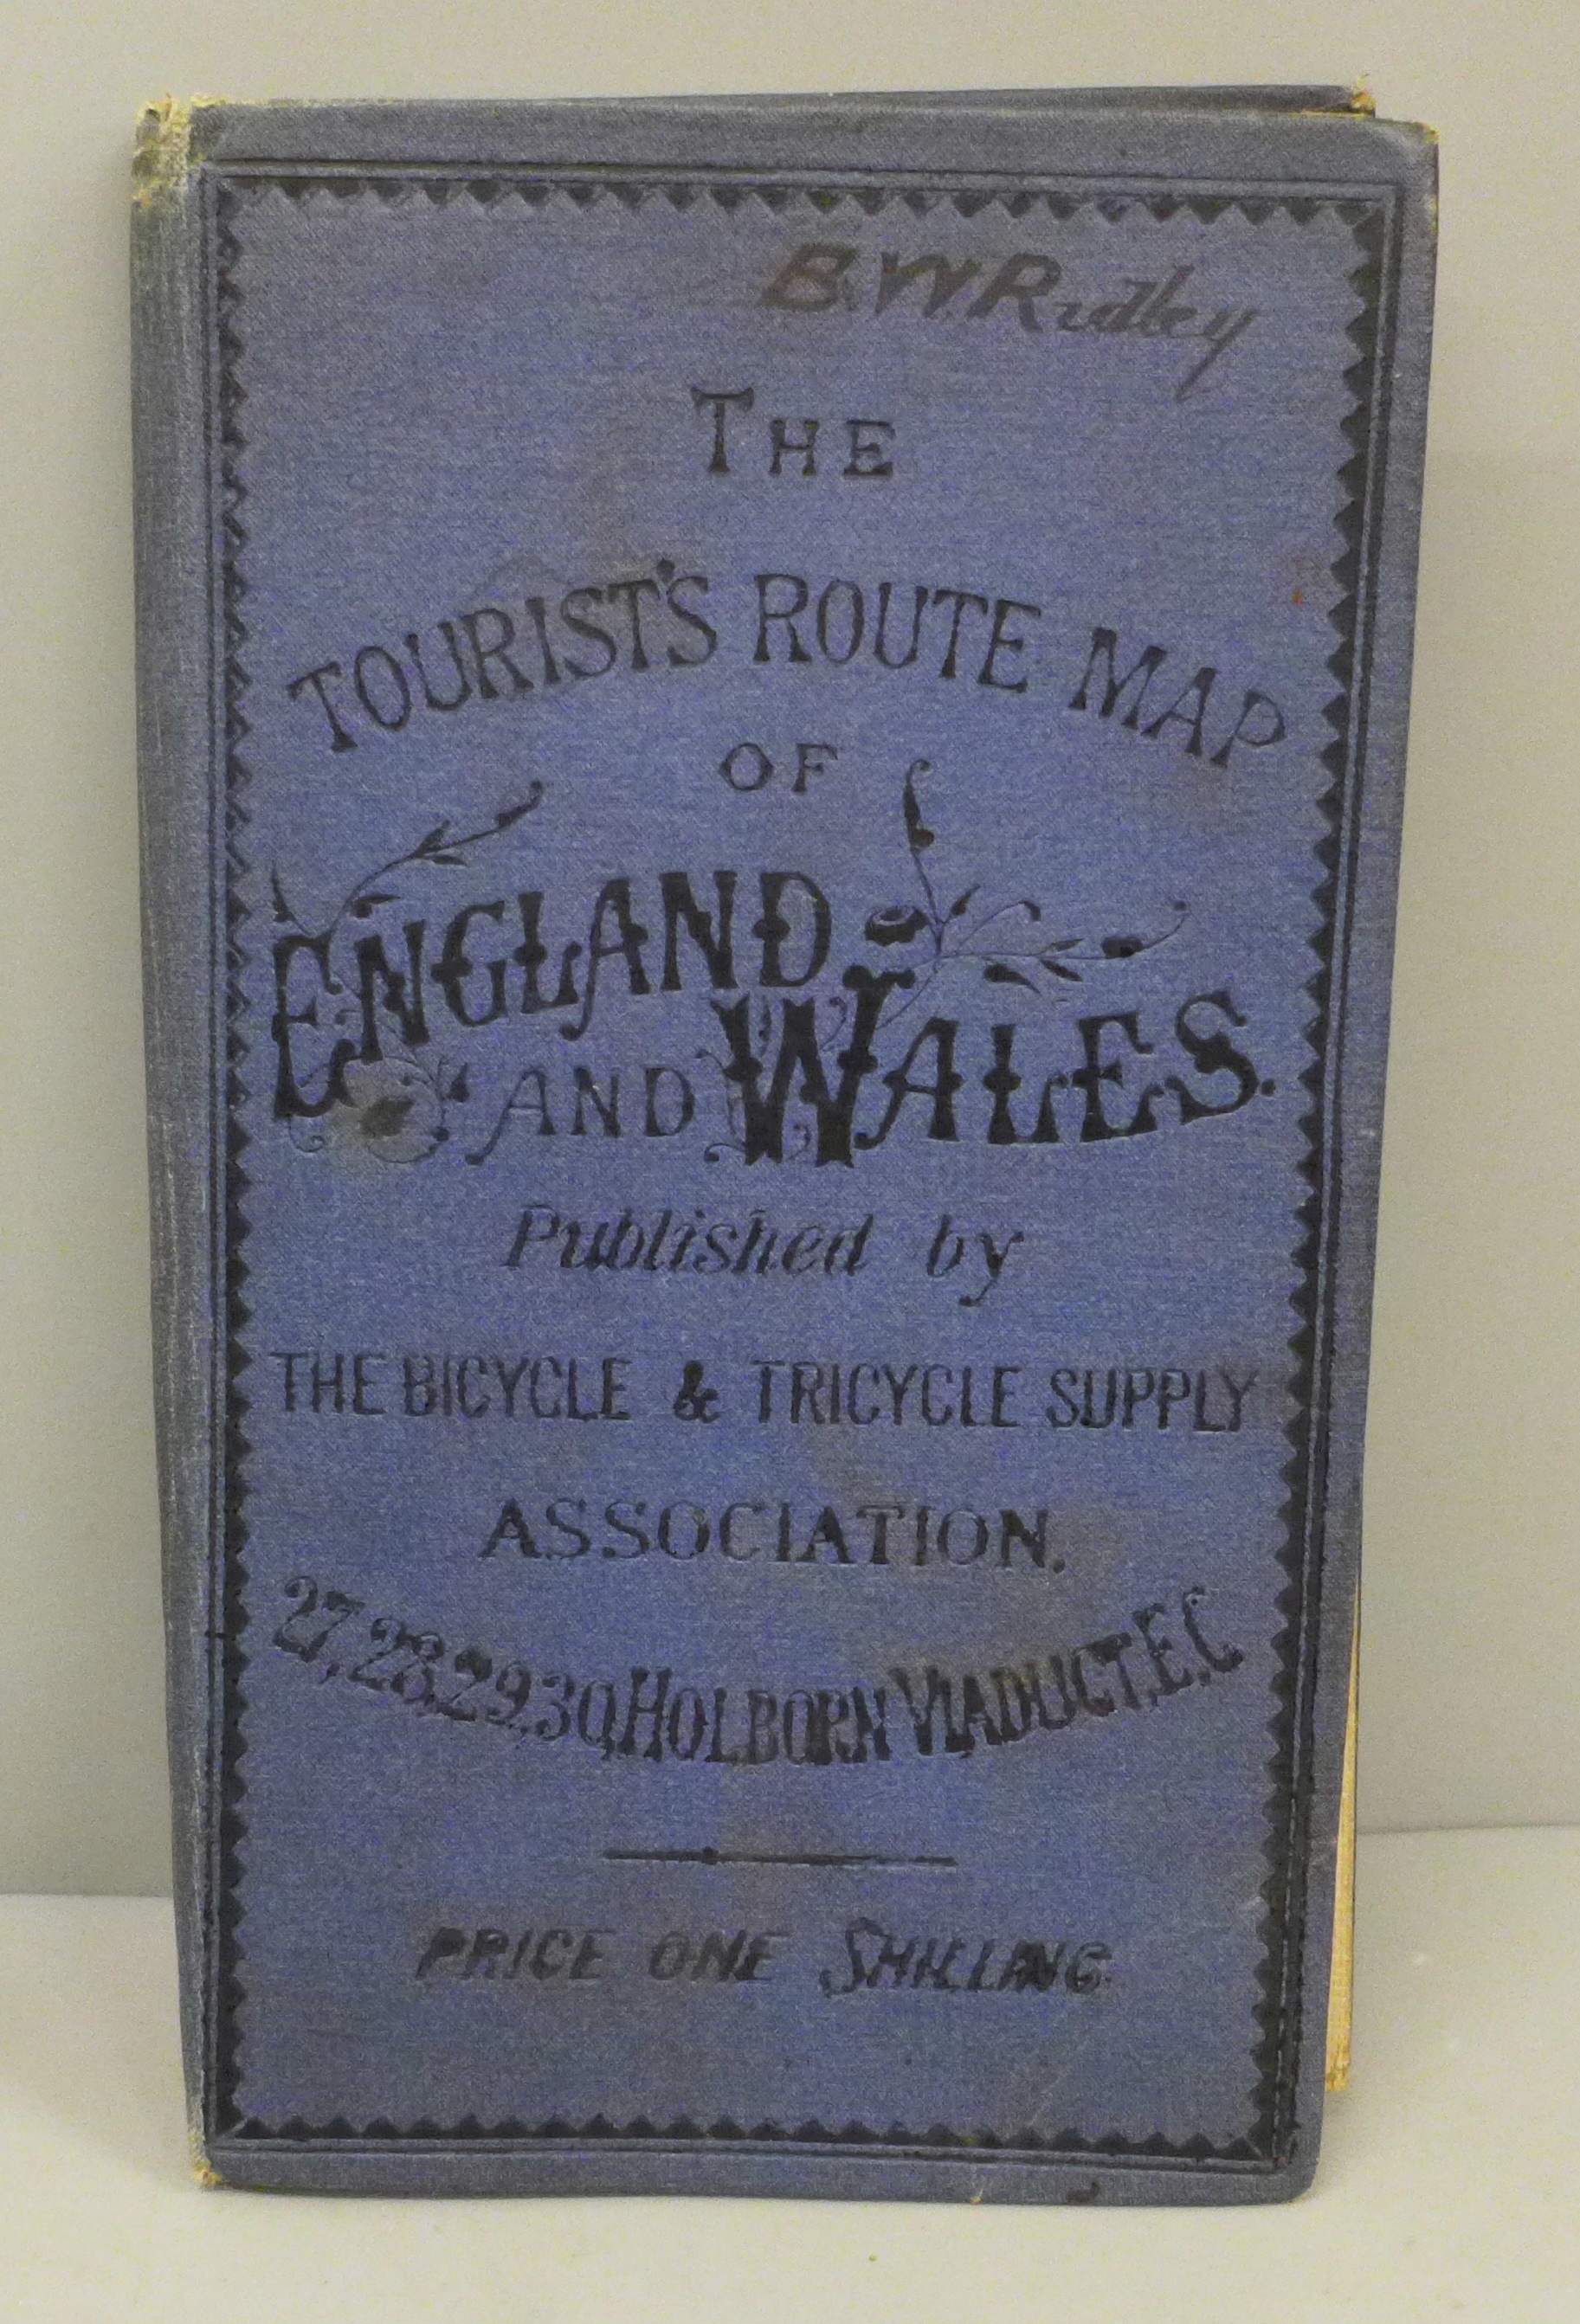 The Tourist's Route Map of England and Wales, Published by The Bicycle and Tricycle Supply